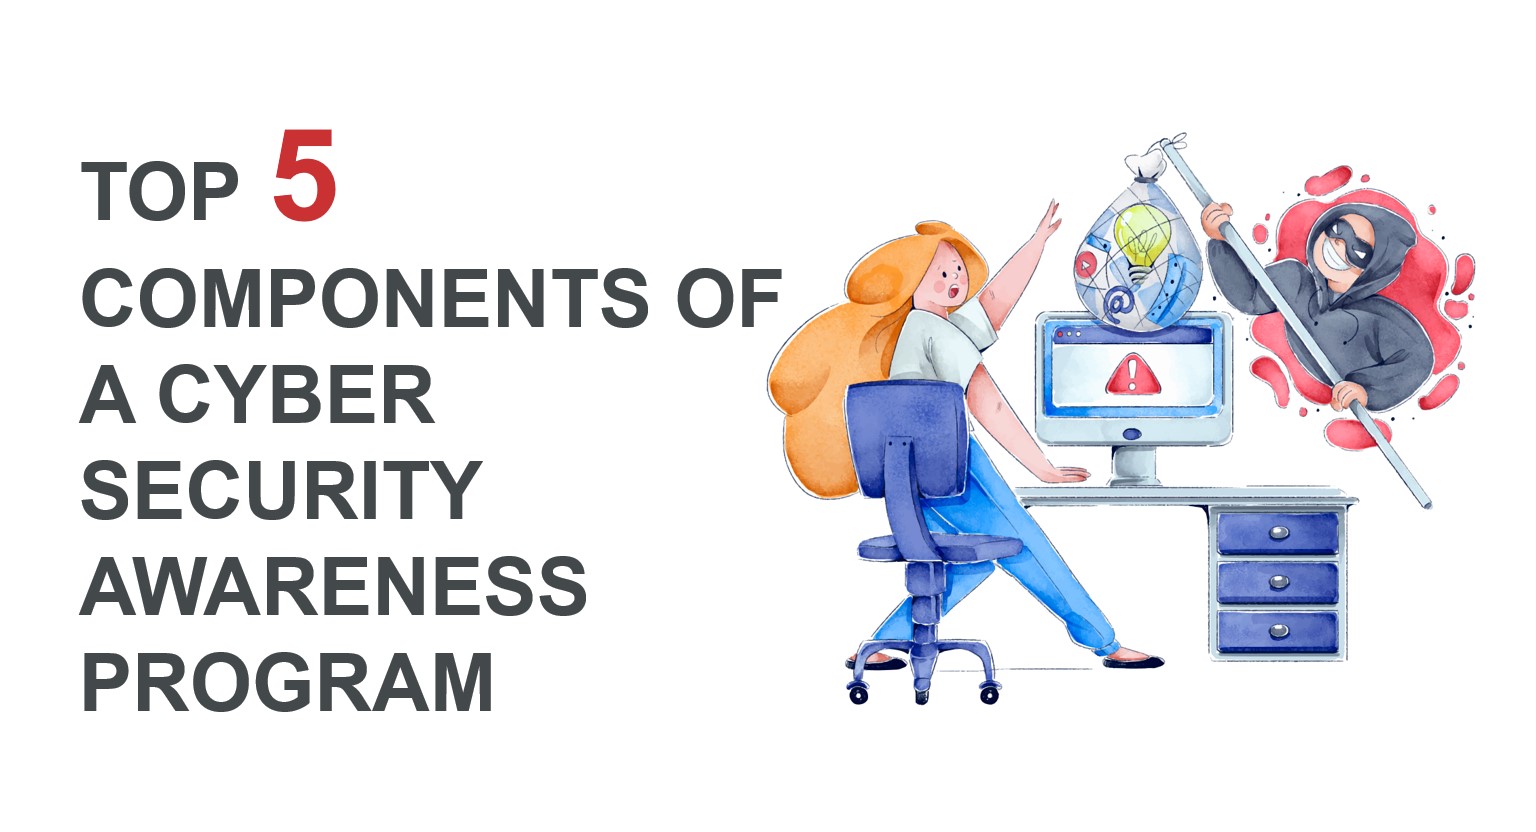 Top 5 Components Of A Cyber Security Awareness Program